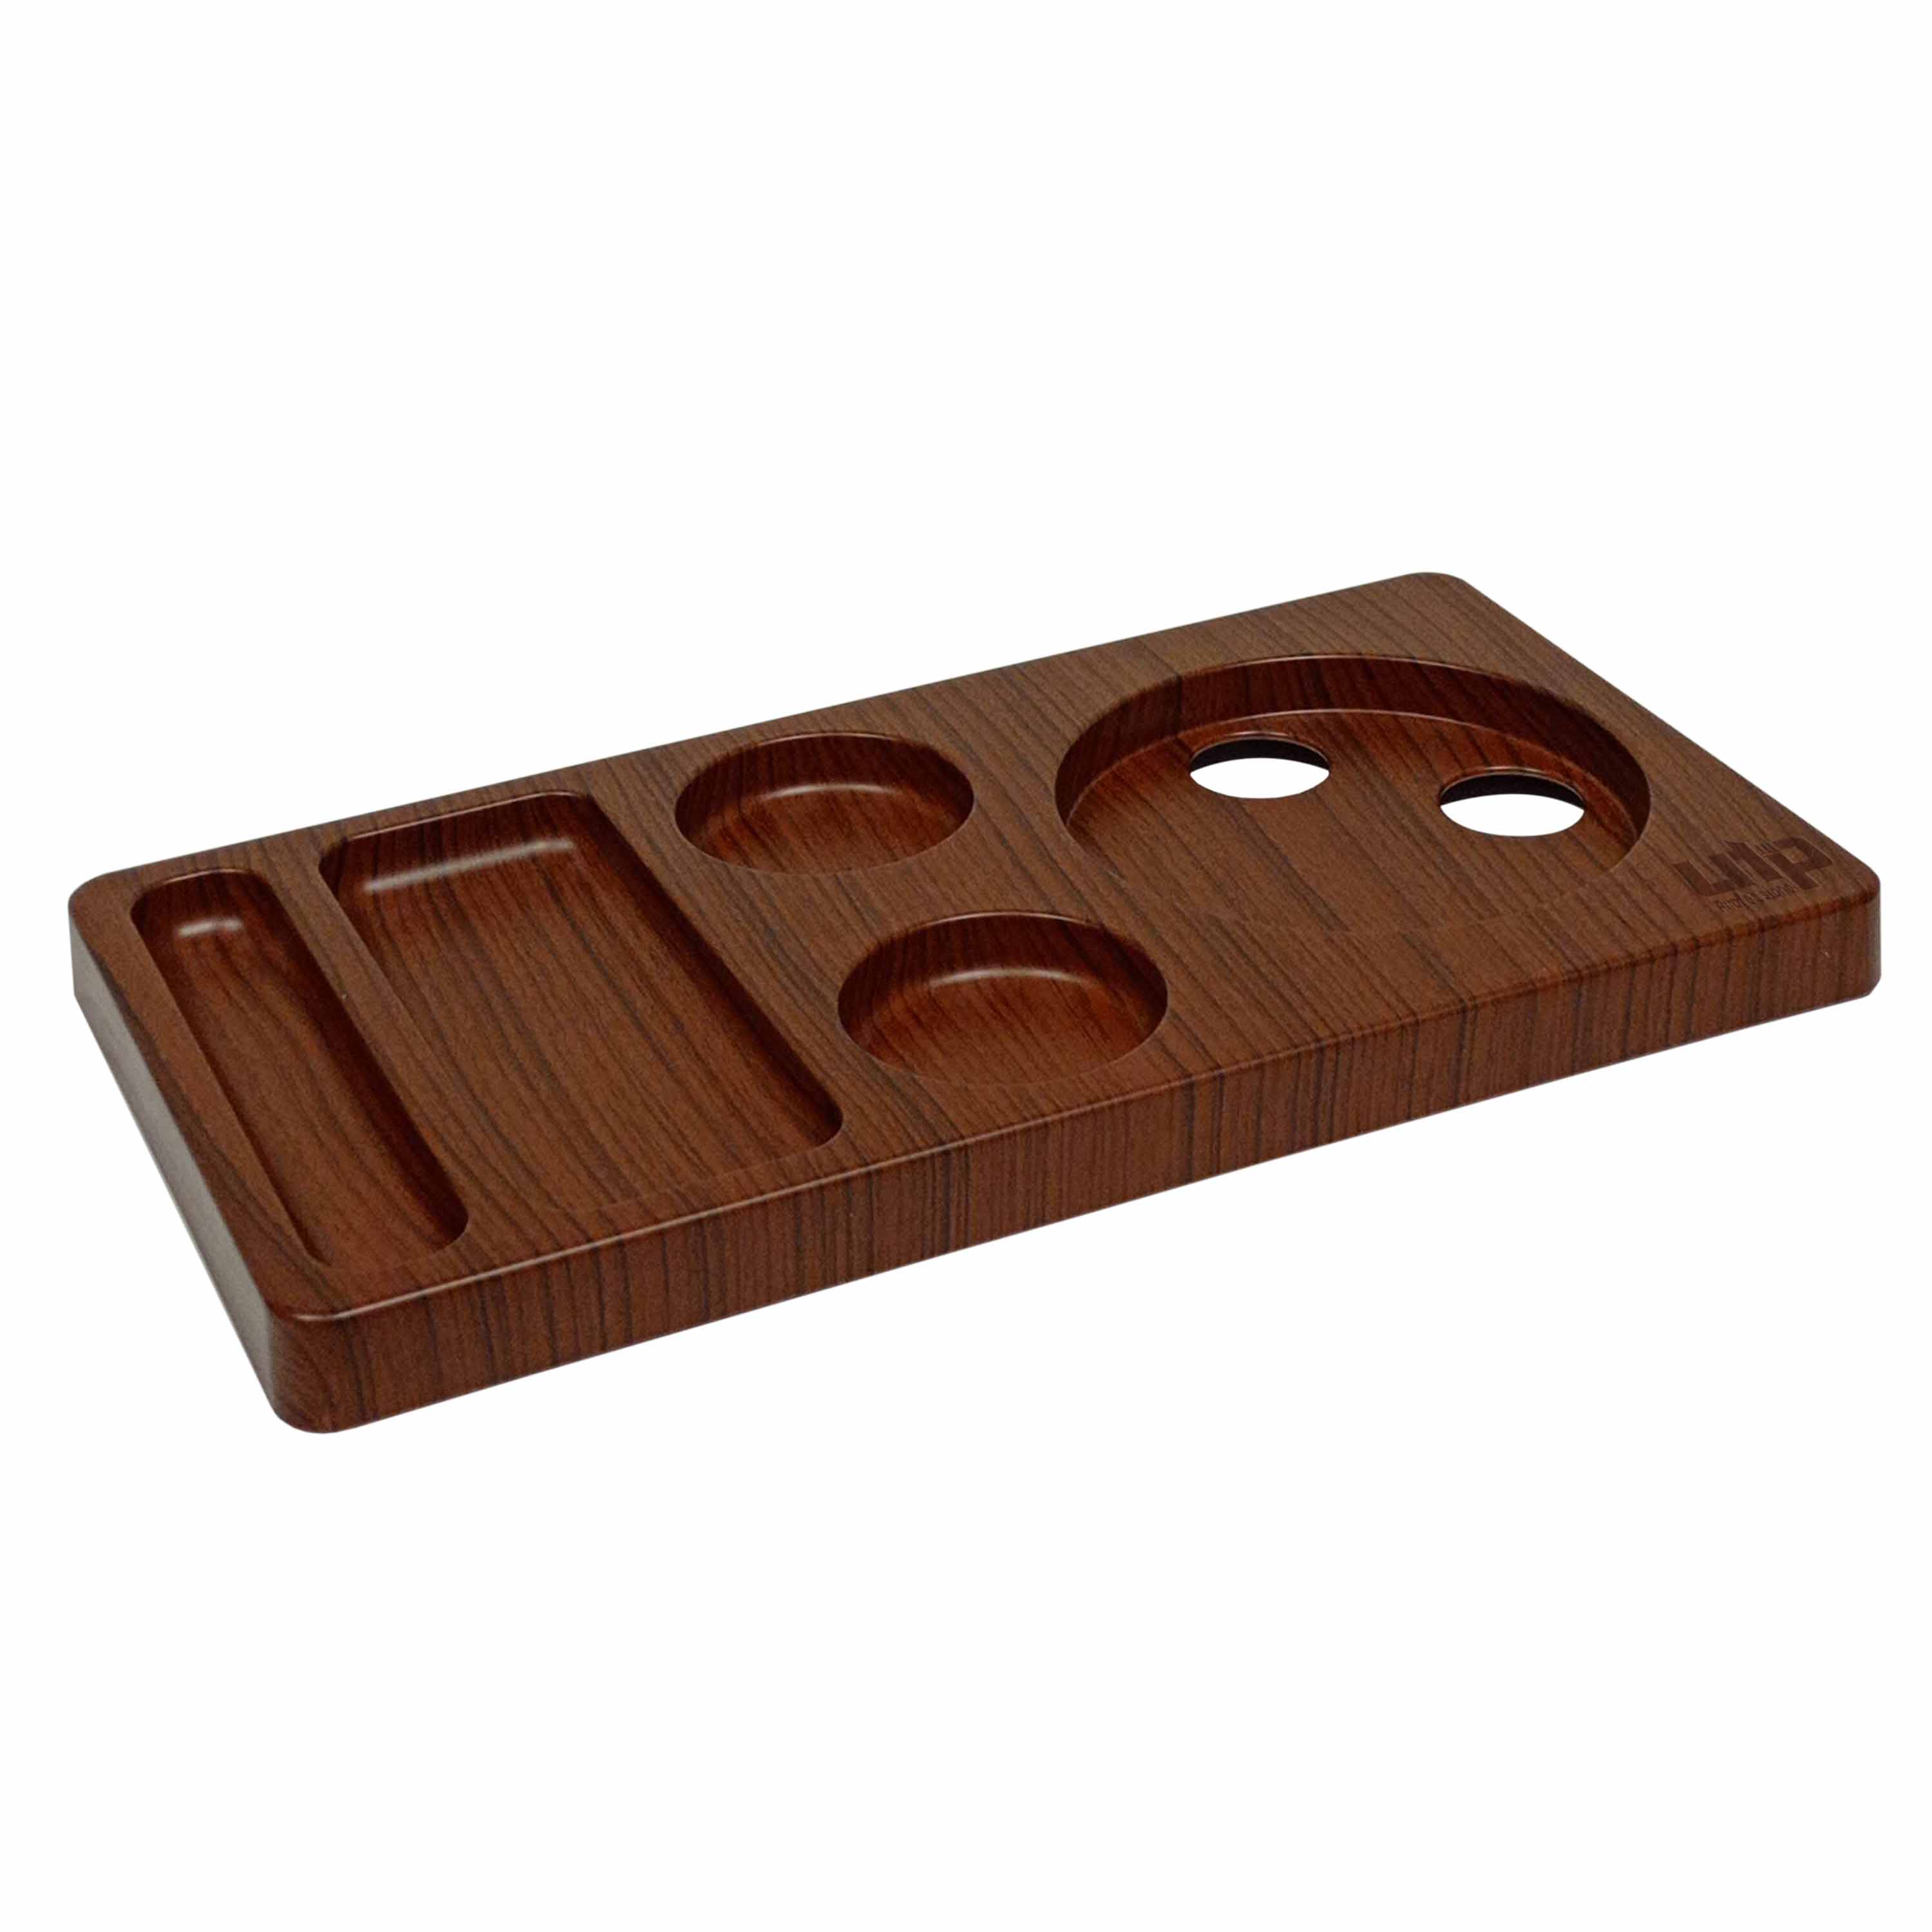 HOTEL TYPE WELCOME AND DINING TRAY WOOD